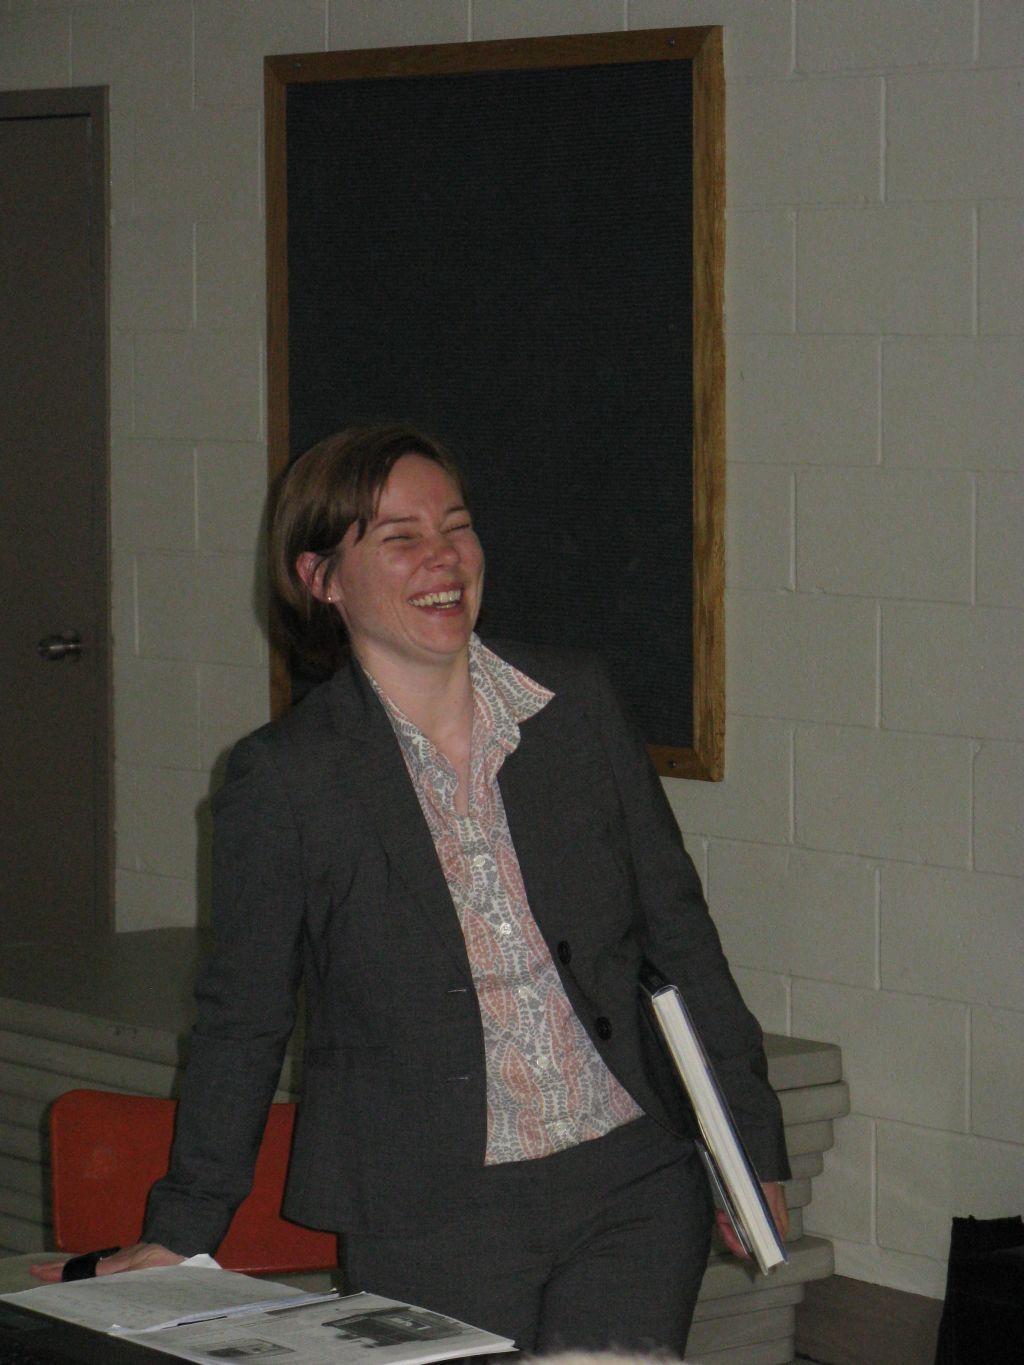 MVAR Meeting 24 February 11 We had a real treat this meeting with not one but two speakers. Anne Shropshire did a presentation on A Way Ahead for the Railroad Museum of Eastern Ontario.